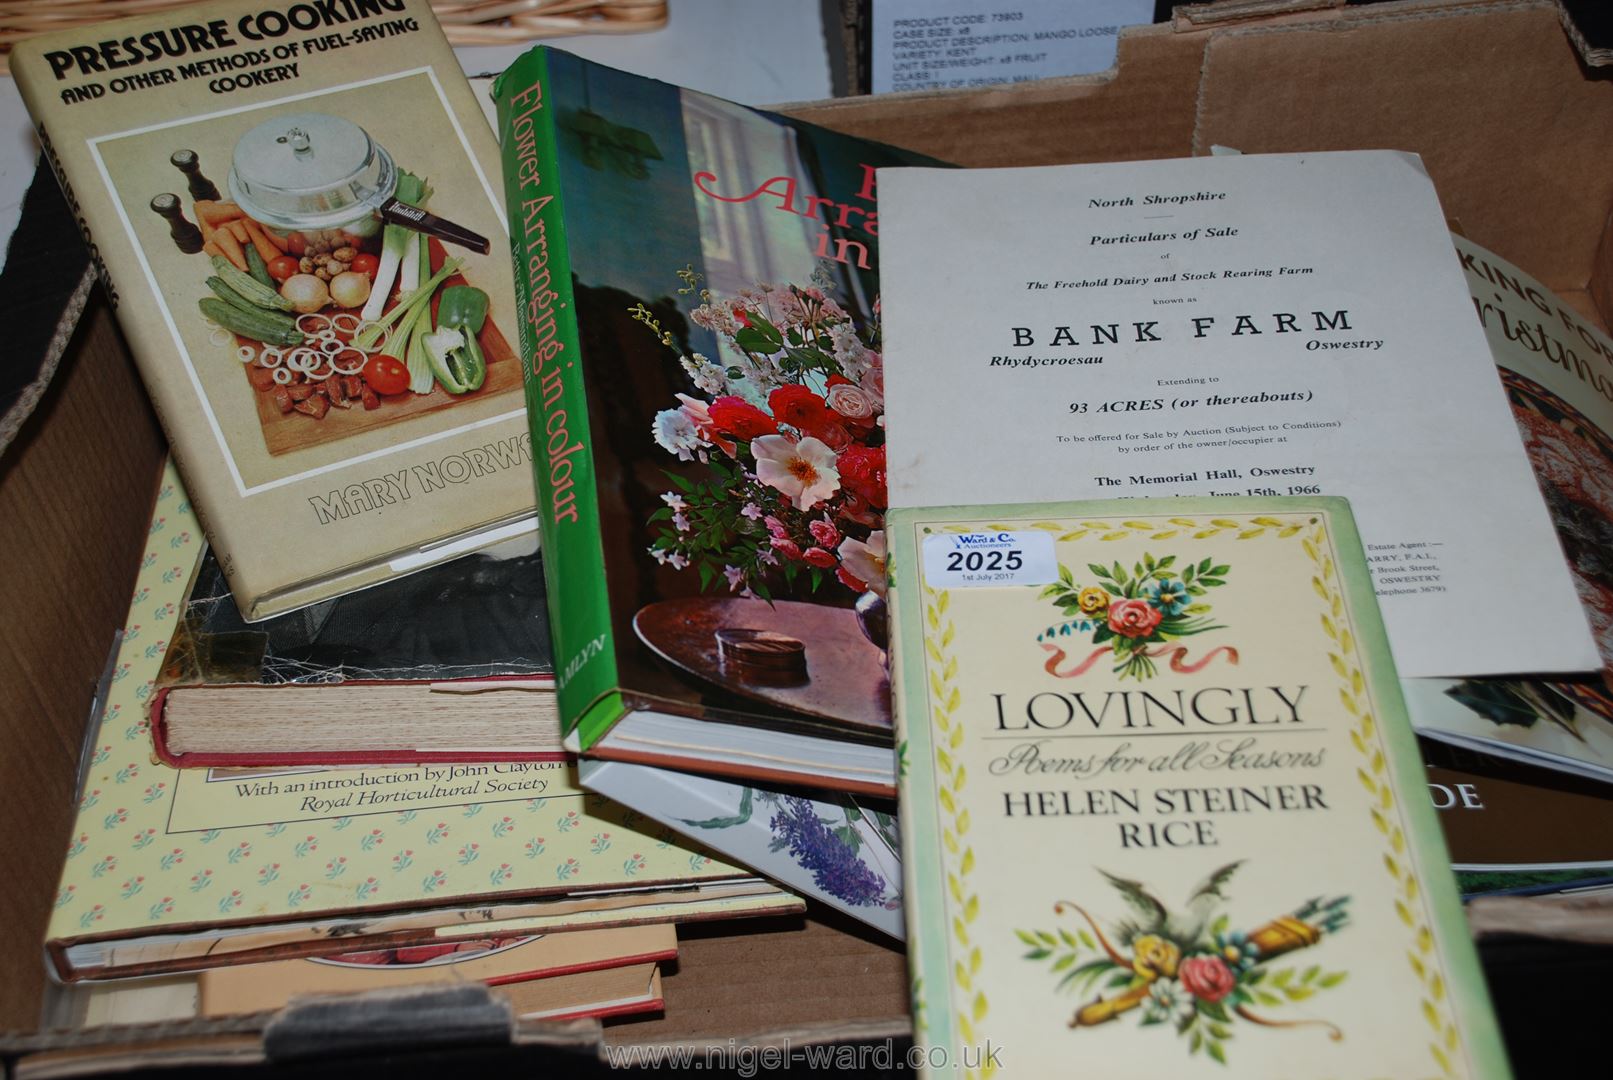 A box of Books incl Flower Arranging, Pressure Cooking,